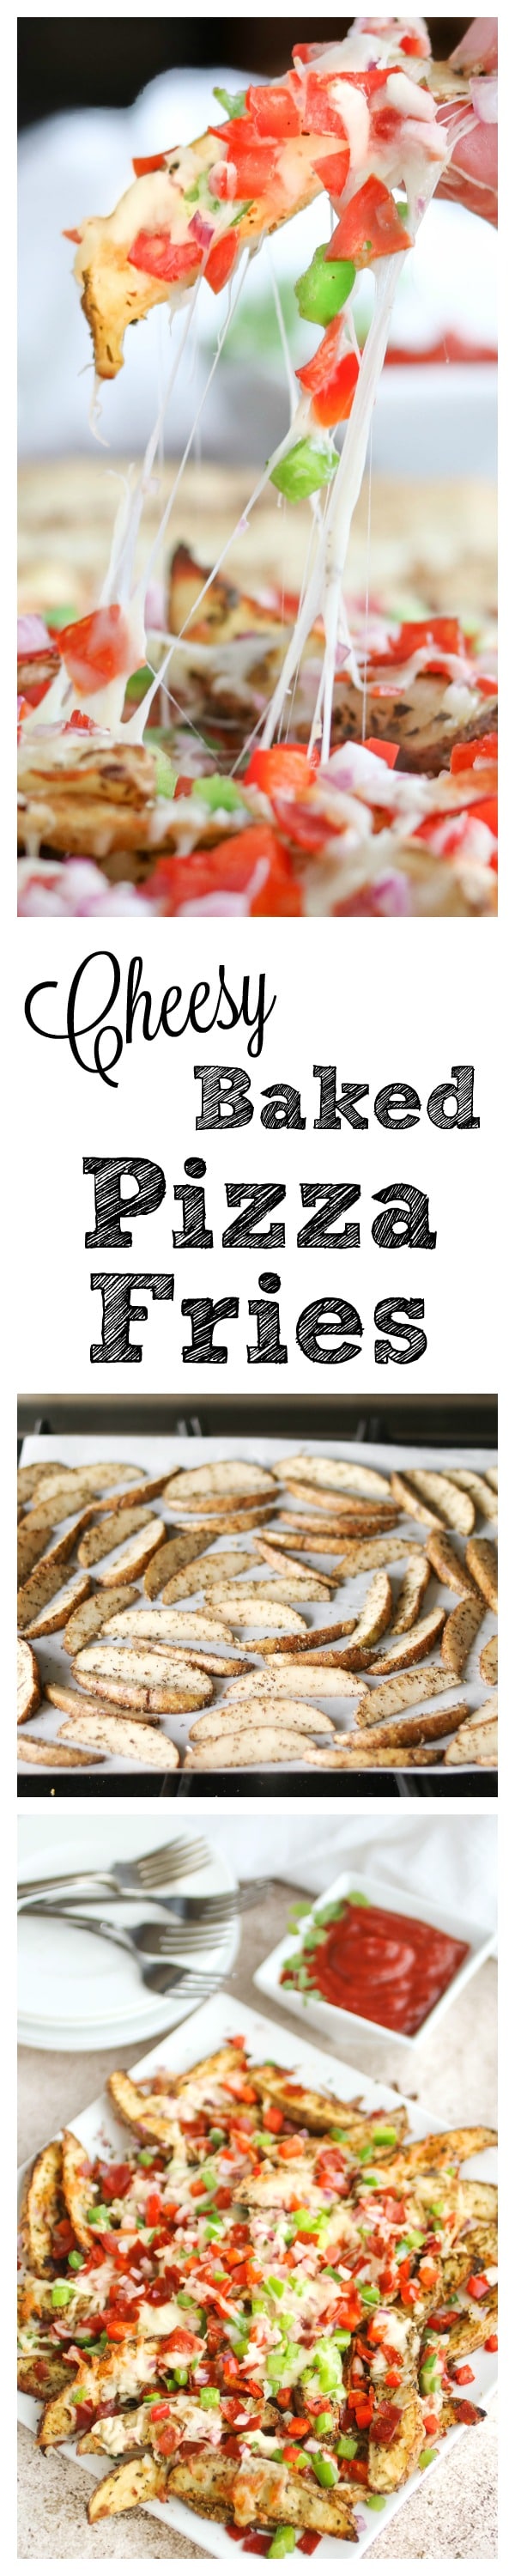 Cheesy Oven-Baked Pizza Fries ~ These Oven-Baked Pizza Fries are so easy to make, and always a total hit! Loaded with cheesy pizza flavors for a deliciously fun twist! A great snack or appetizer … and perfect for game day! {www.TwoHealthyKitchens.com}